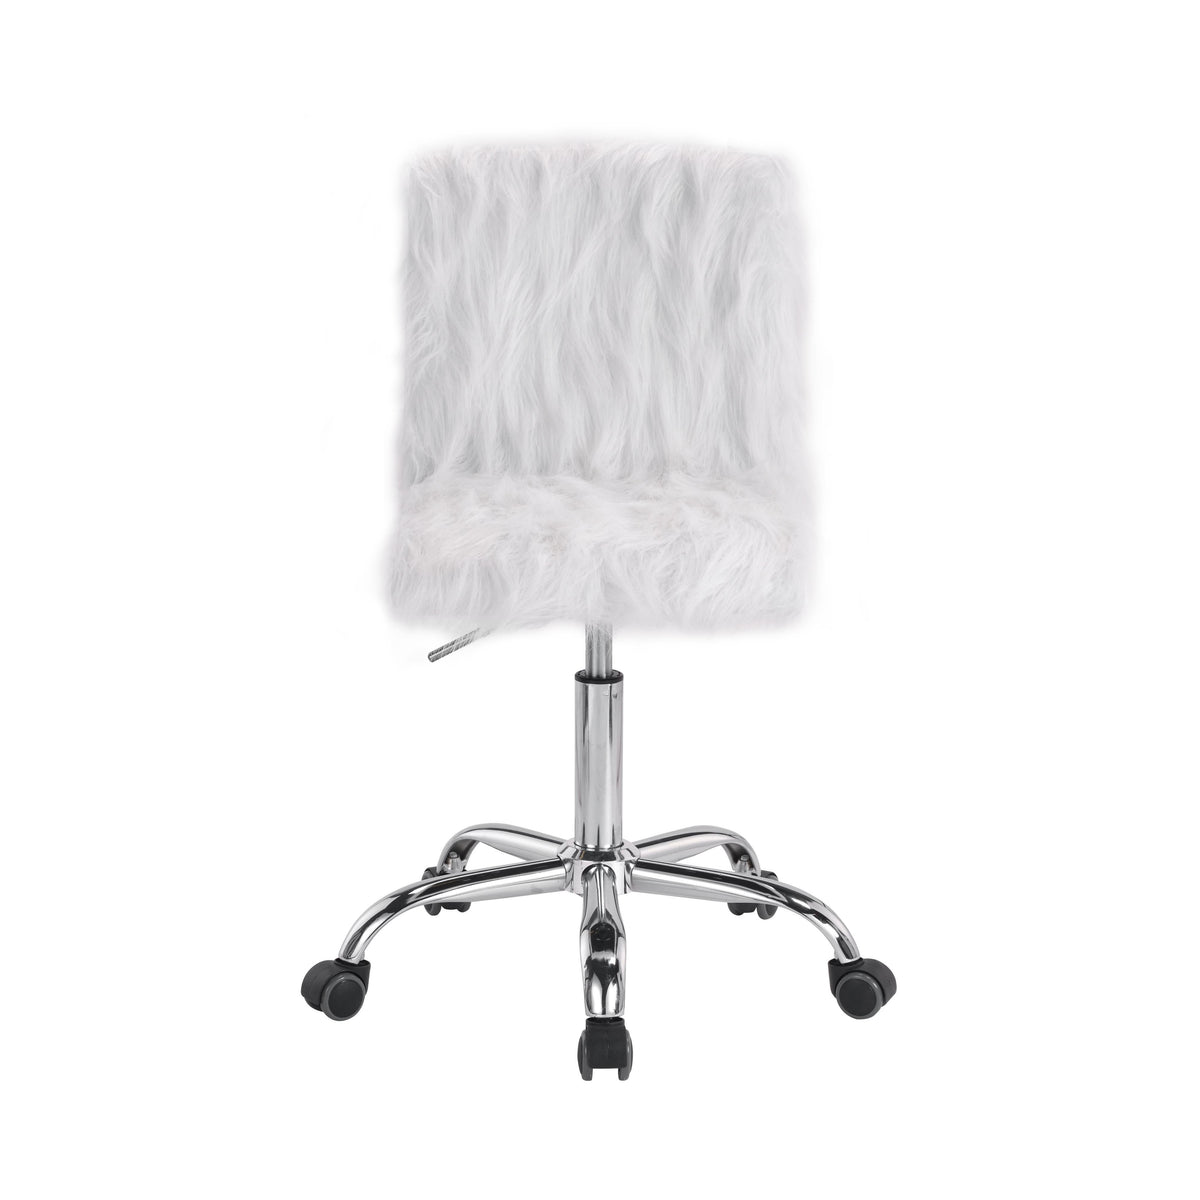 Acme Furniture Arundell OF00120 Office Chair - White